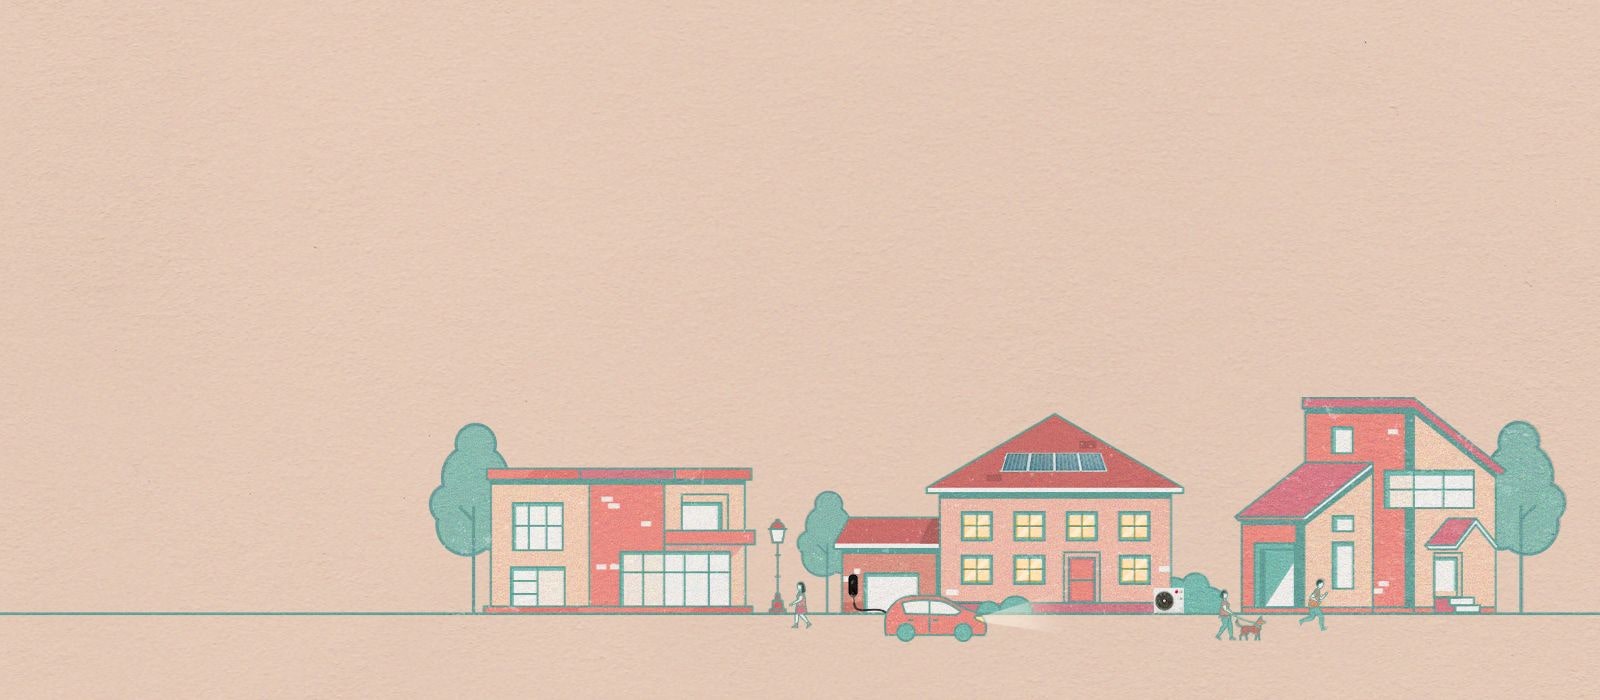 A vintage style cartoon town with a car parked in front of a house.